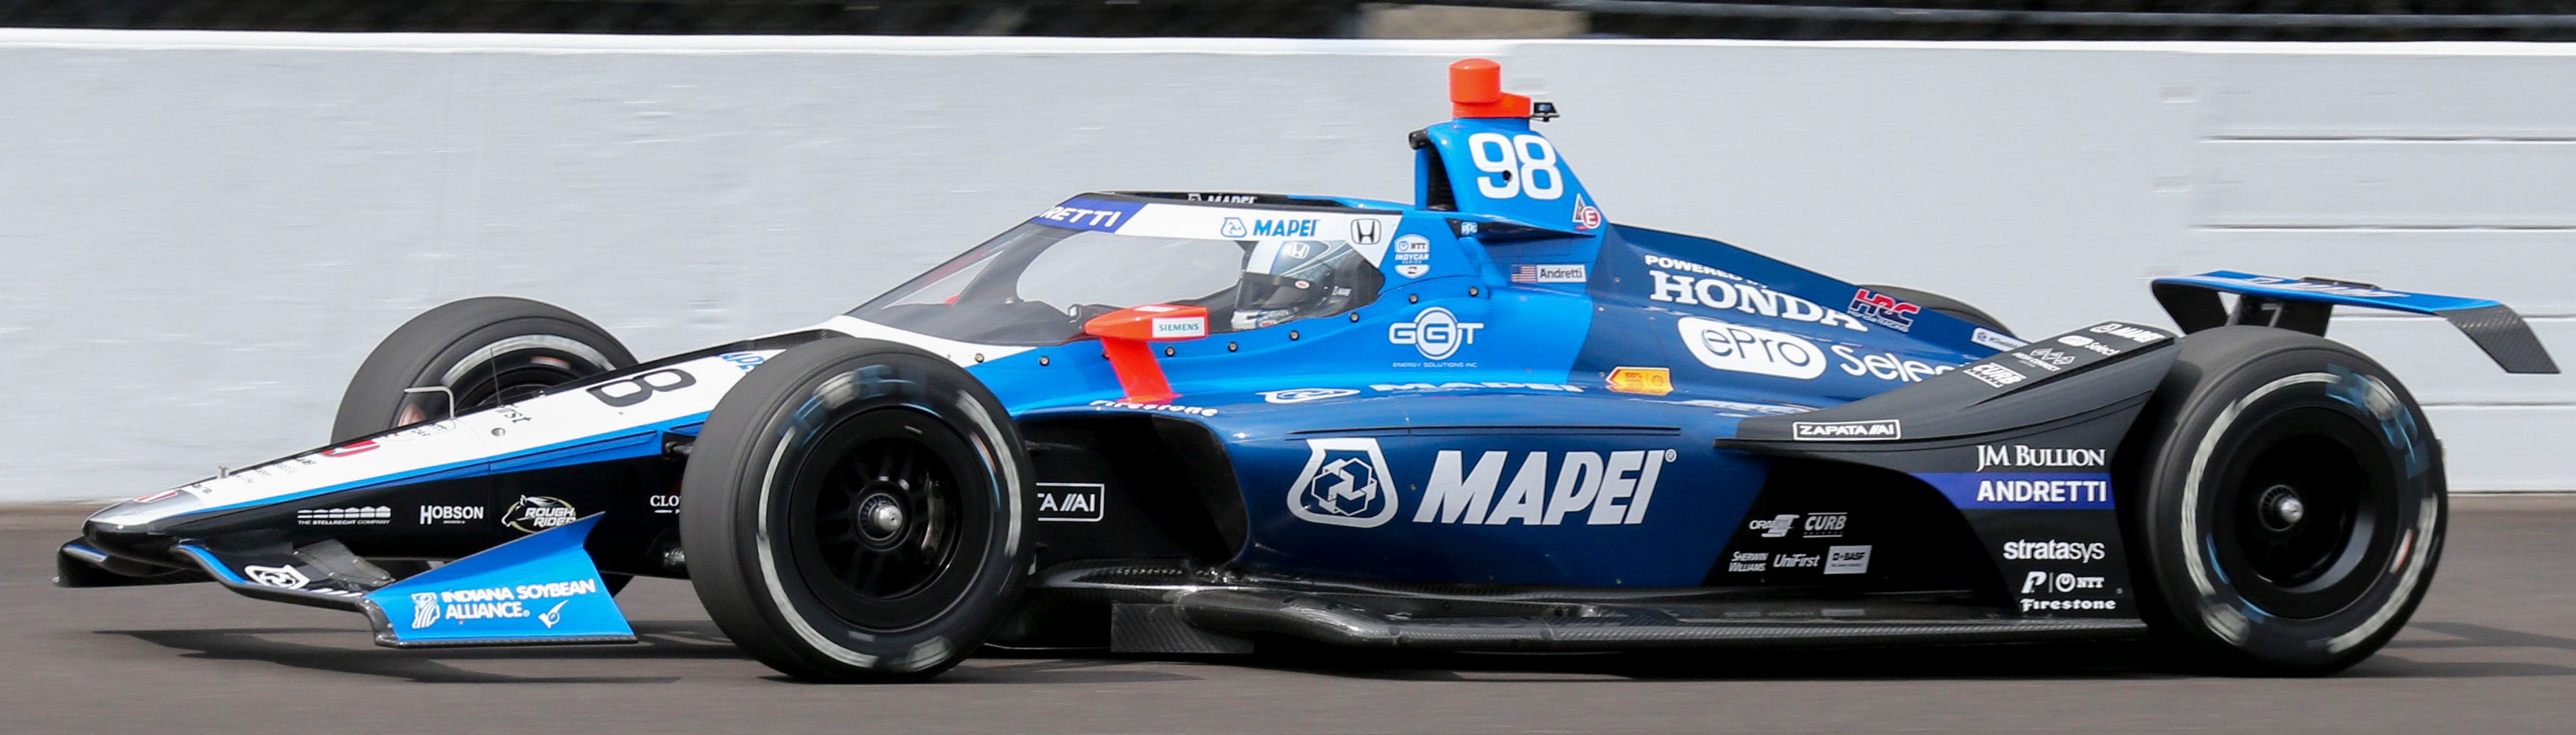 Who is Marco Andretti? Get to know Andretti Global's driver set for Indy 500 race at IMS